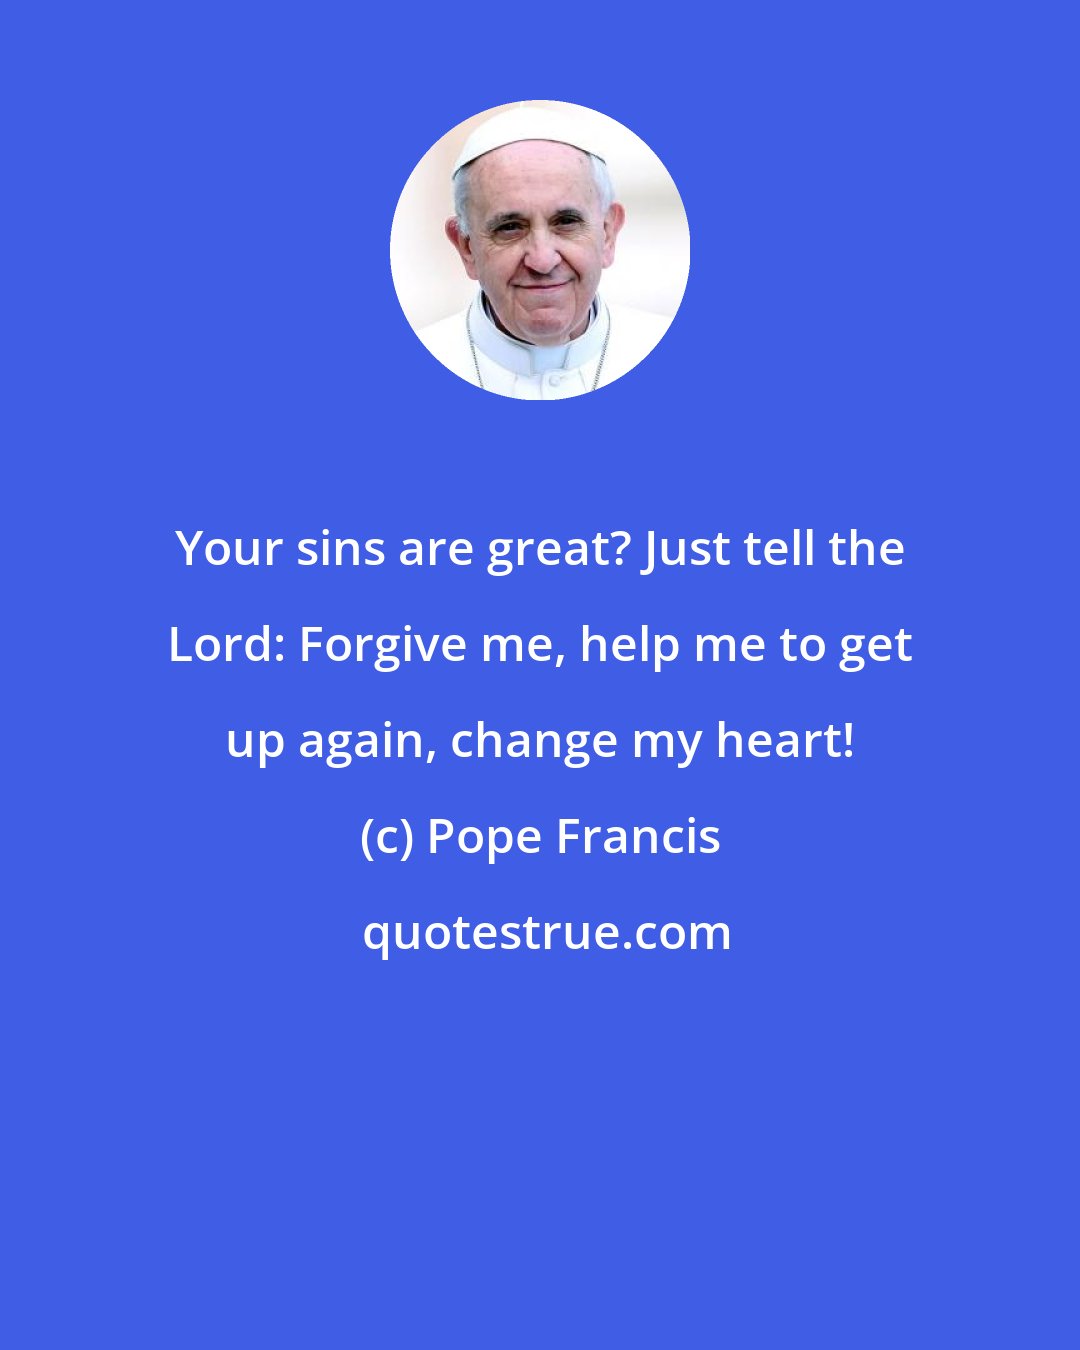 Pope Francis: Your sins are great? Just tell the Lord: Forgive me, help me to get up again, change my heart!